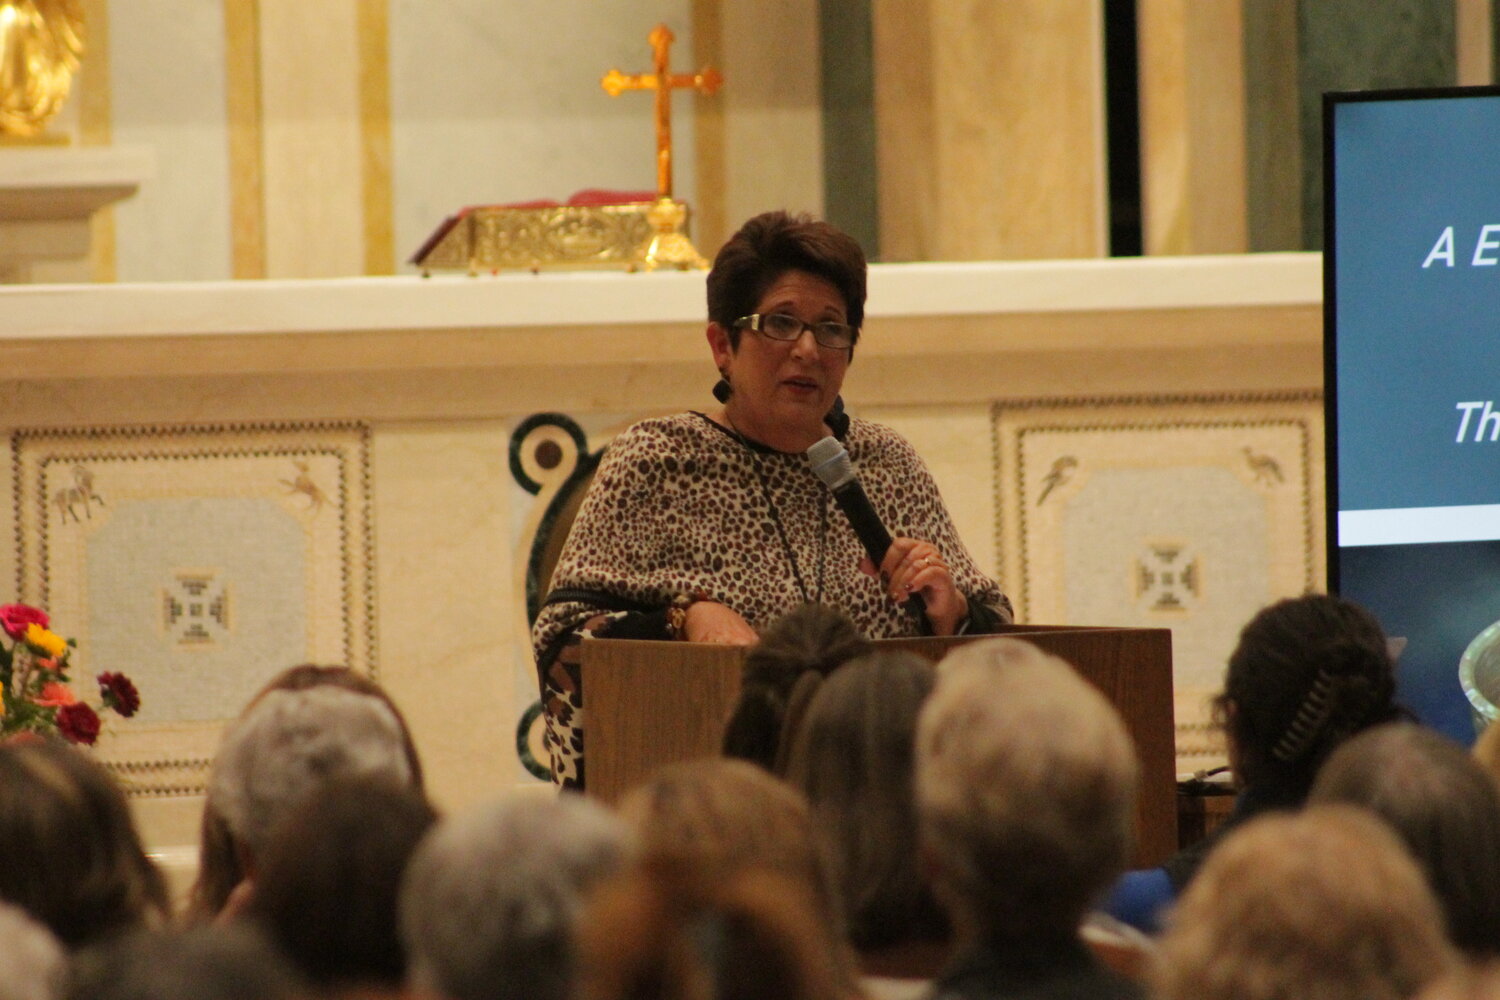 Teresa Tomeo, motivational speaker, nationally-syndicated Catholic radio host and award-winning author of a dozen books, addresses about 250 women at an Oct. 6 “Ladies Night Out” event in the Cathedral of St. Joseph. She also led a women’s retreat the following day. Both events were sponsored by the diocesan Women’s Ministry.